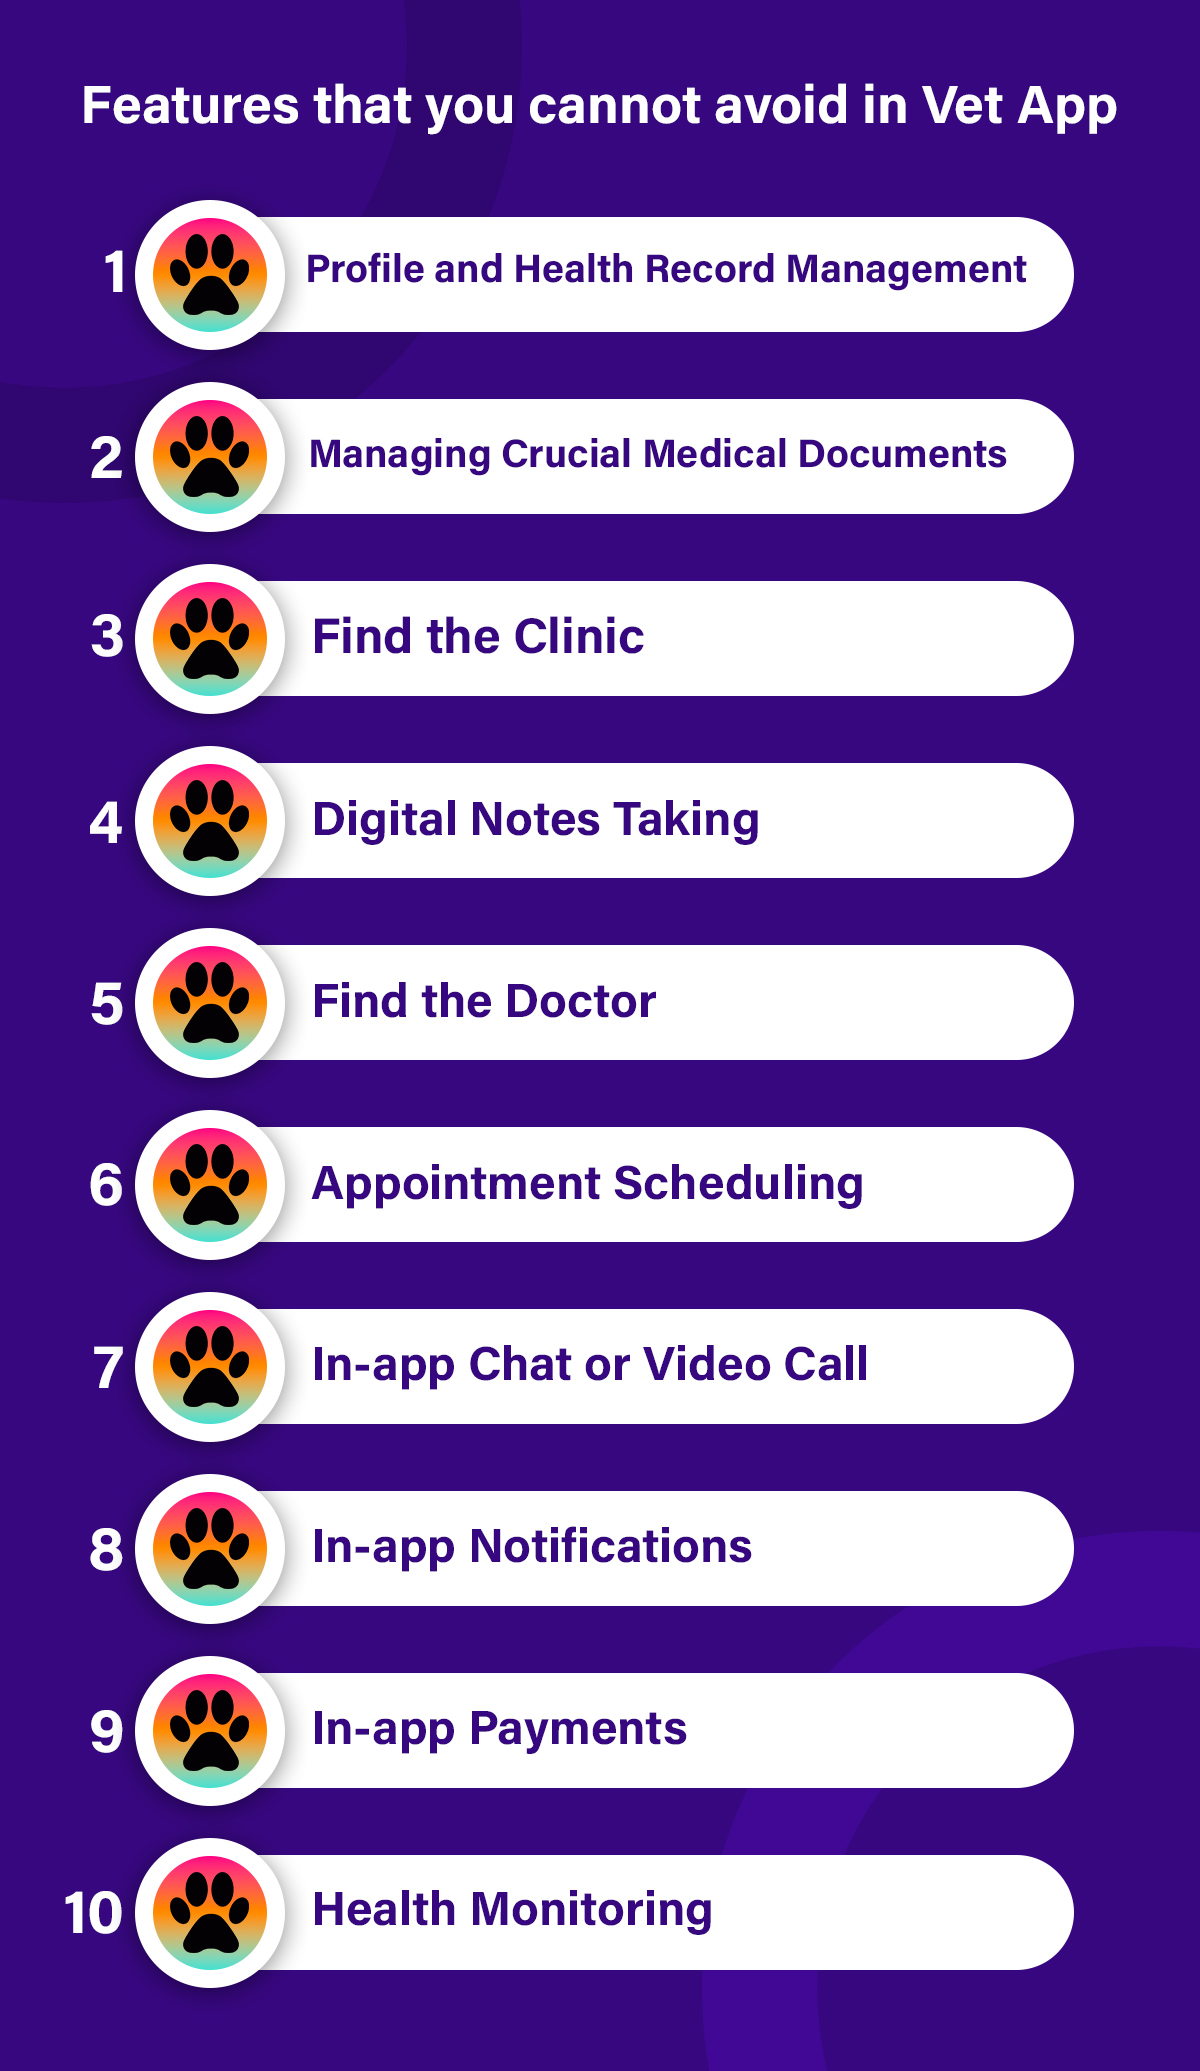 Features that you cannot avoid in Vet App